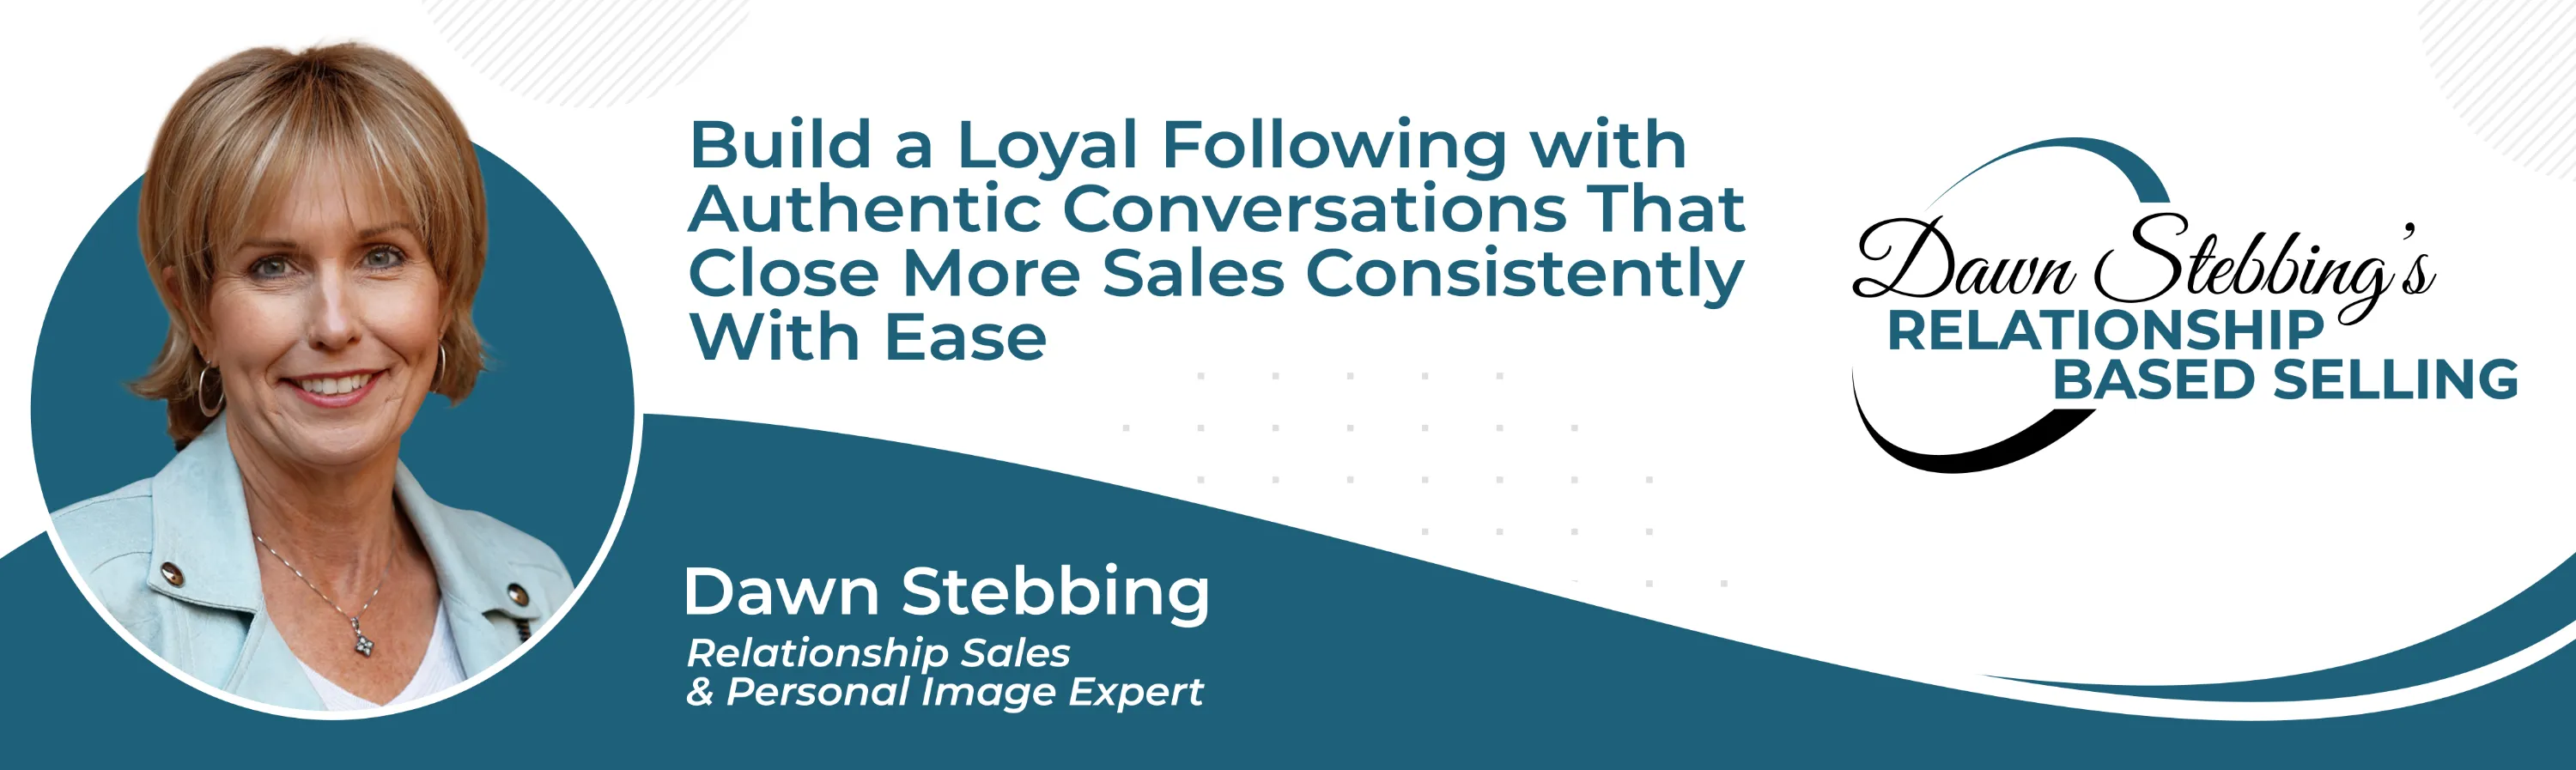 Relationship Based Selling banner with photo of Dawn Stebbing 